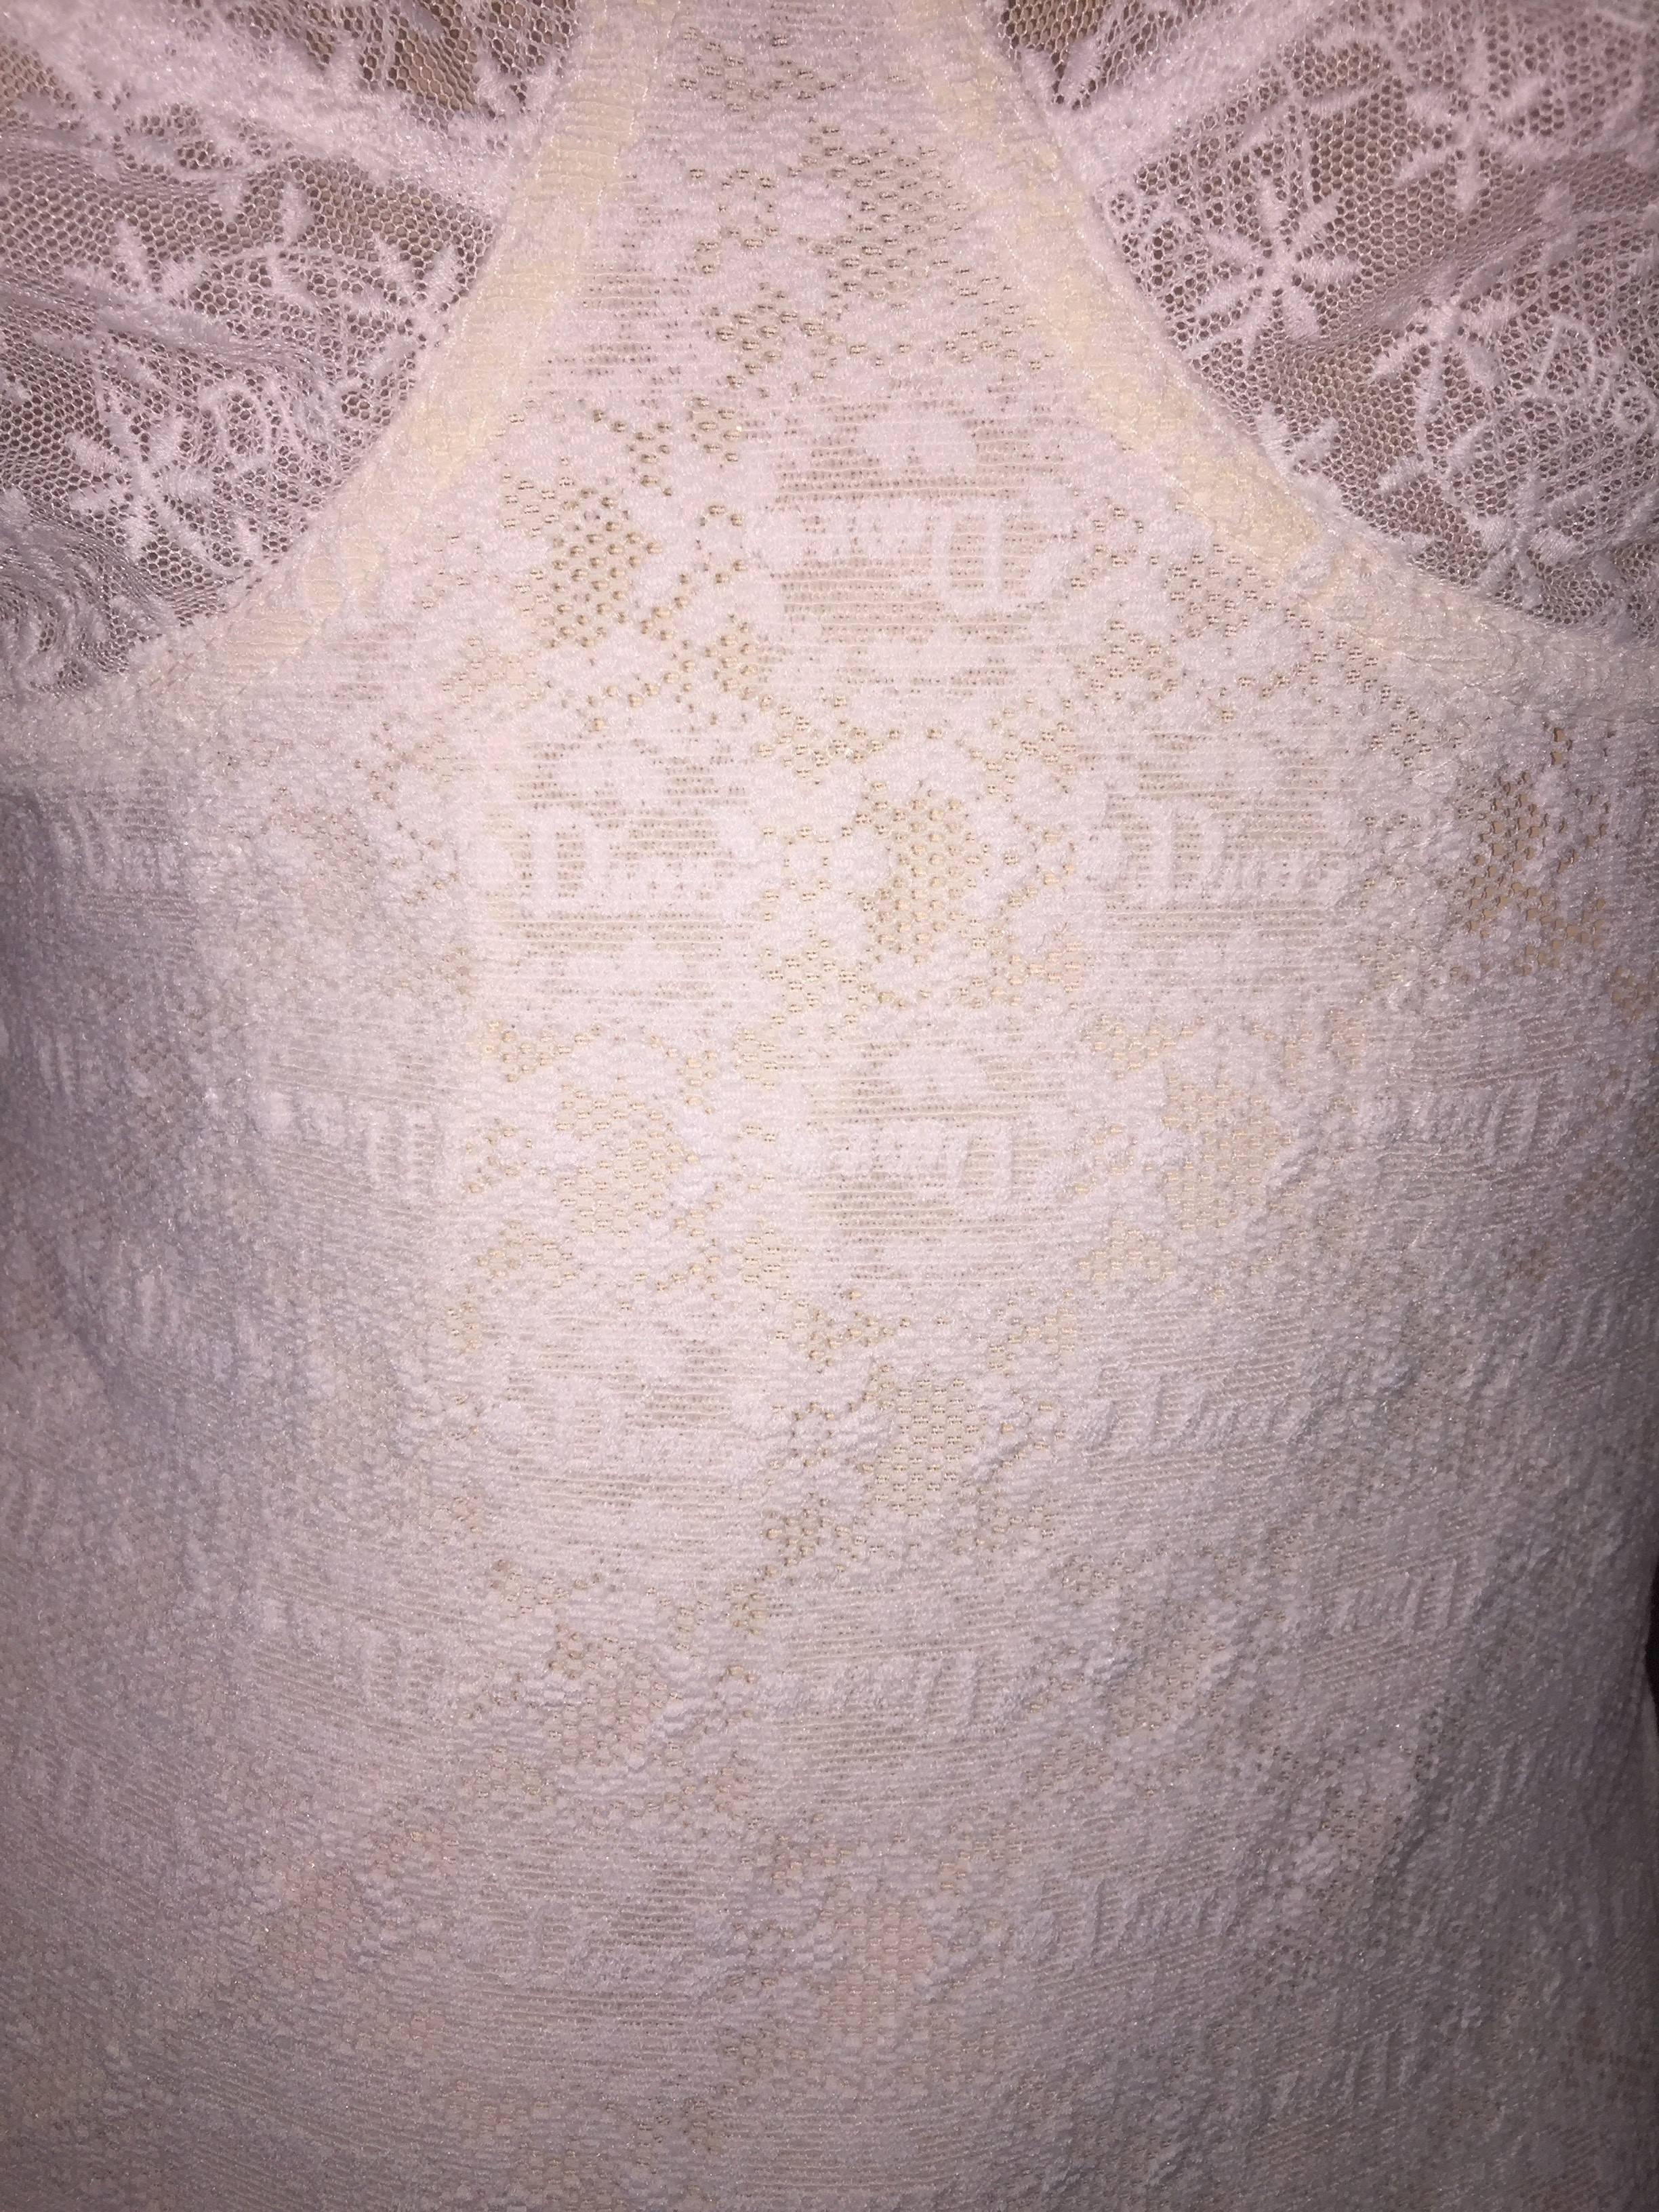 DESIGNER: 1980's Christian Dior 

Please contact for more information and/or photos.

CONDITION: Good- only imperfection is 2 tiny holes in the mesh lining, very minor and will never been seen. 

MATERIAL: Nylon/Cotton/Spandex/Polyester

COUNTRY